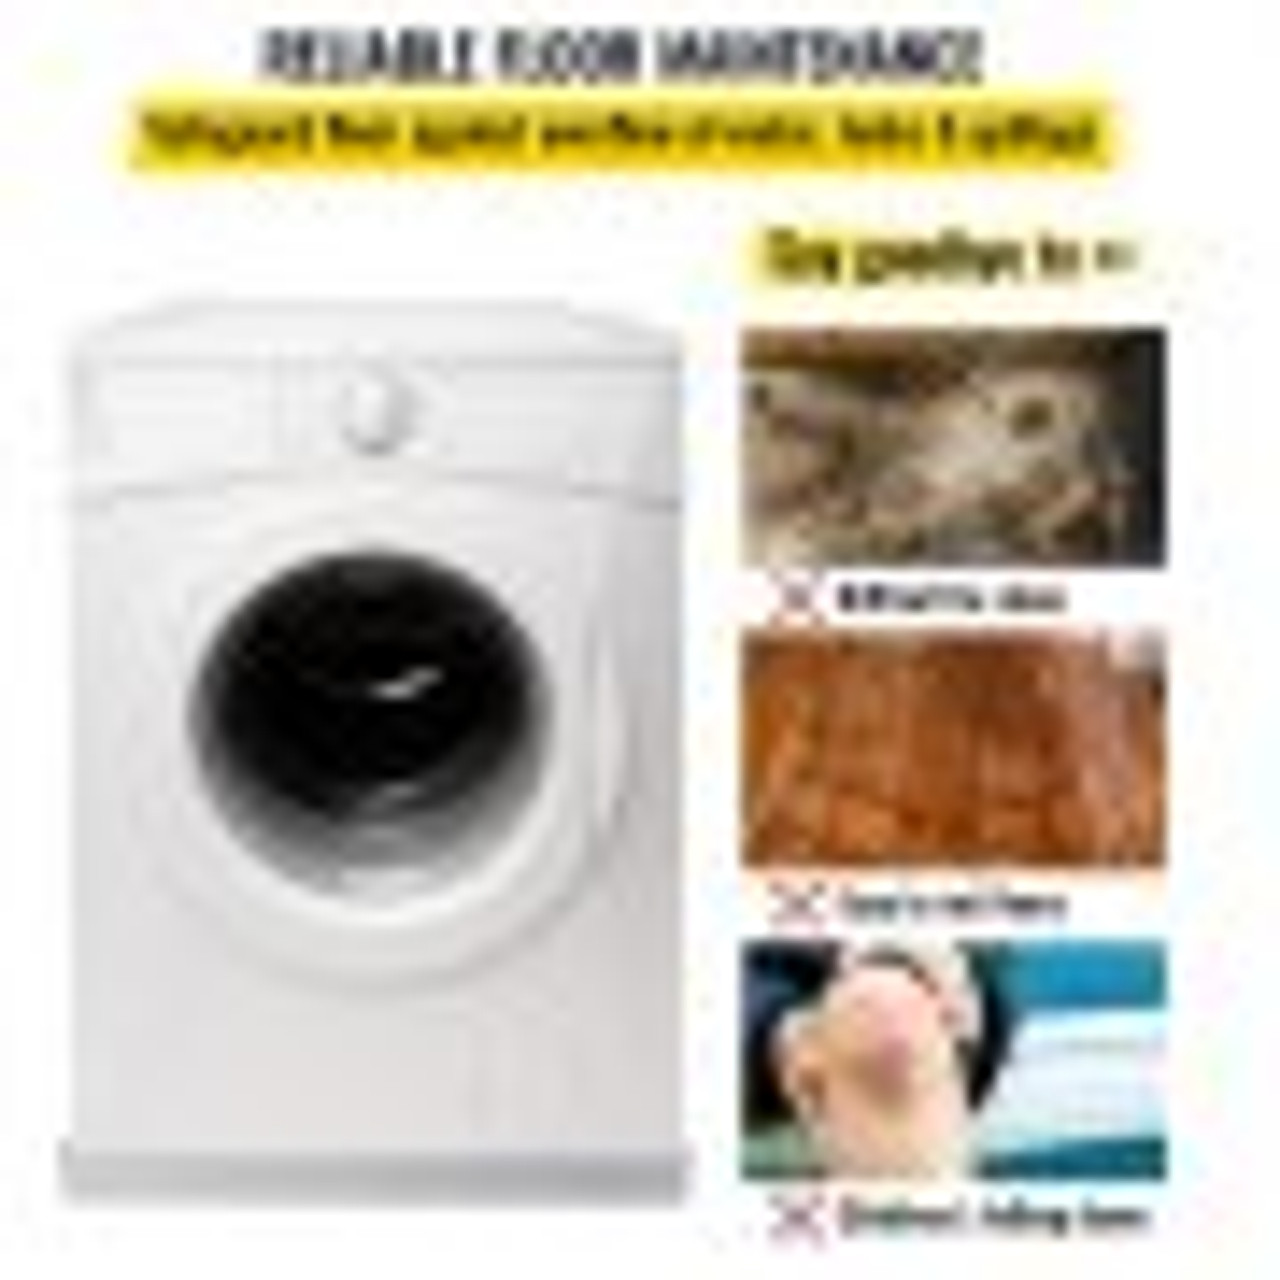 32 x 32 x 2.5 Inch Washing Machine Pan 18 GA Thickness 304 Stainless Steel Heavy Duty Compact Washer Drip Tray with Drain Hole & Hose Adapter